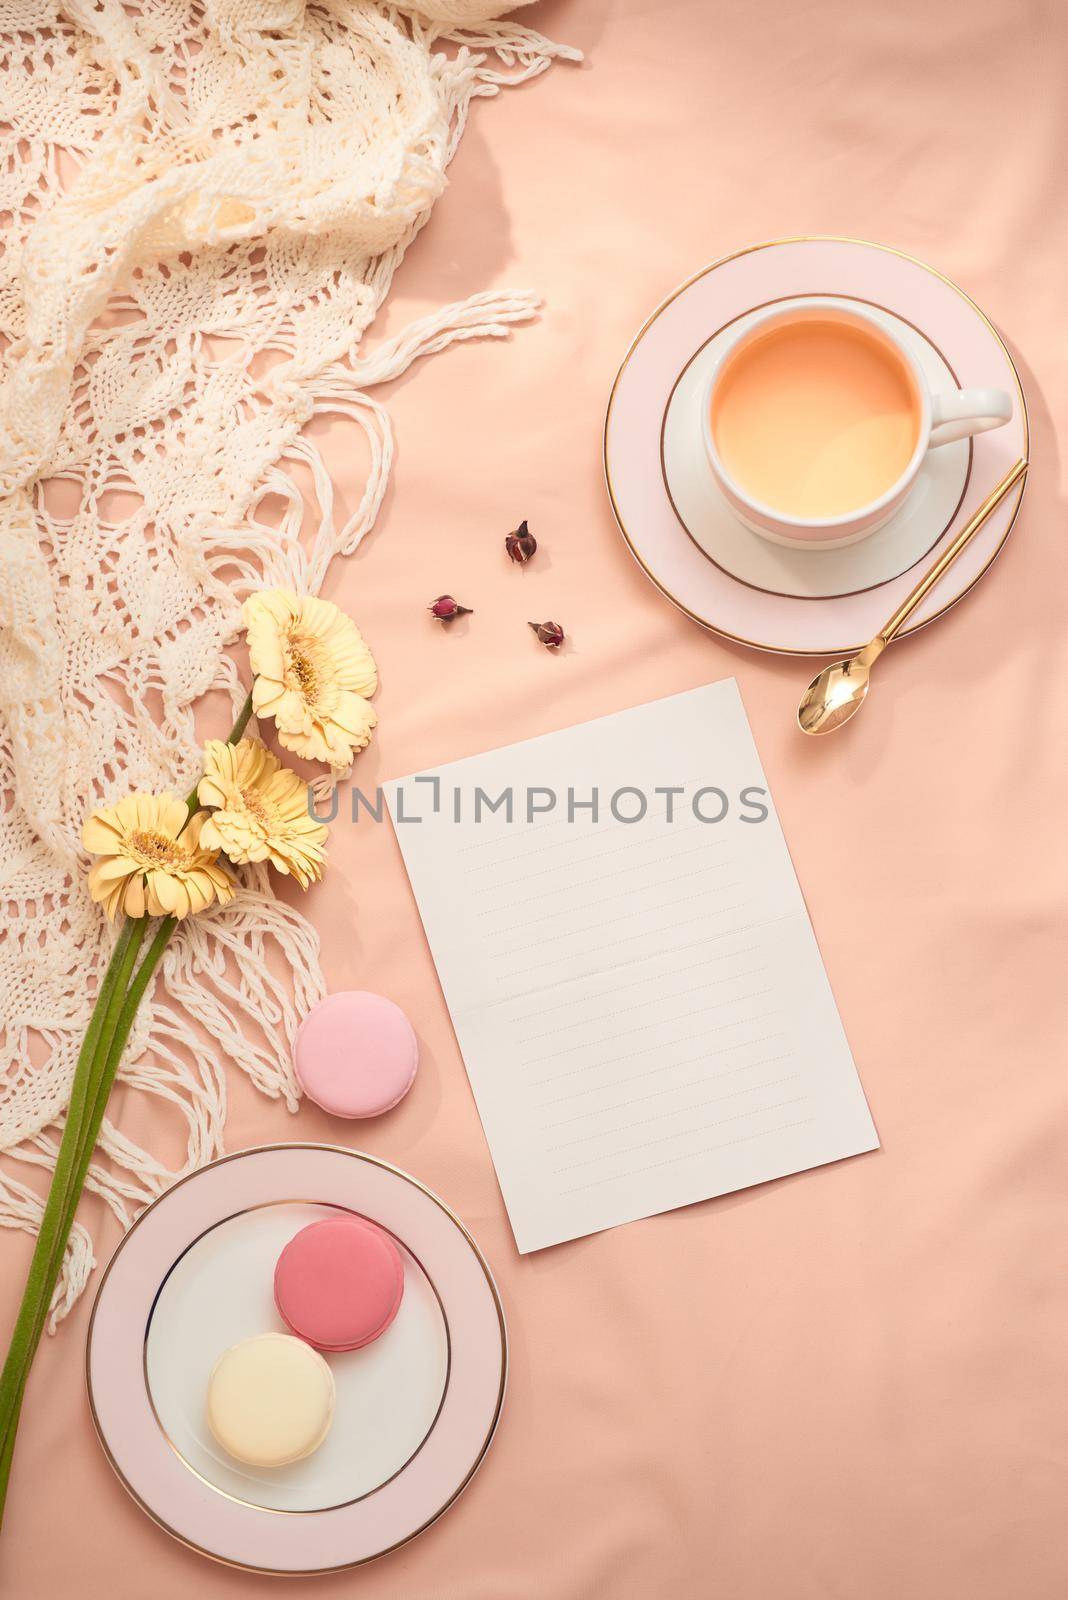 Envelope, flowers, and macarons with cup of tea on light background by makidotvn